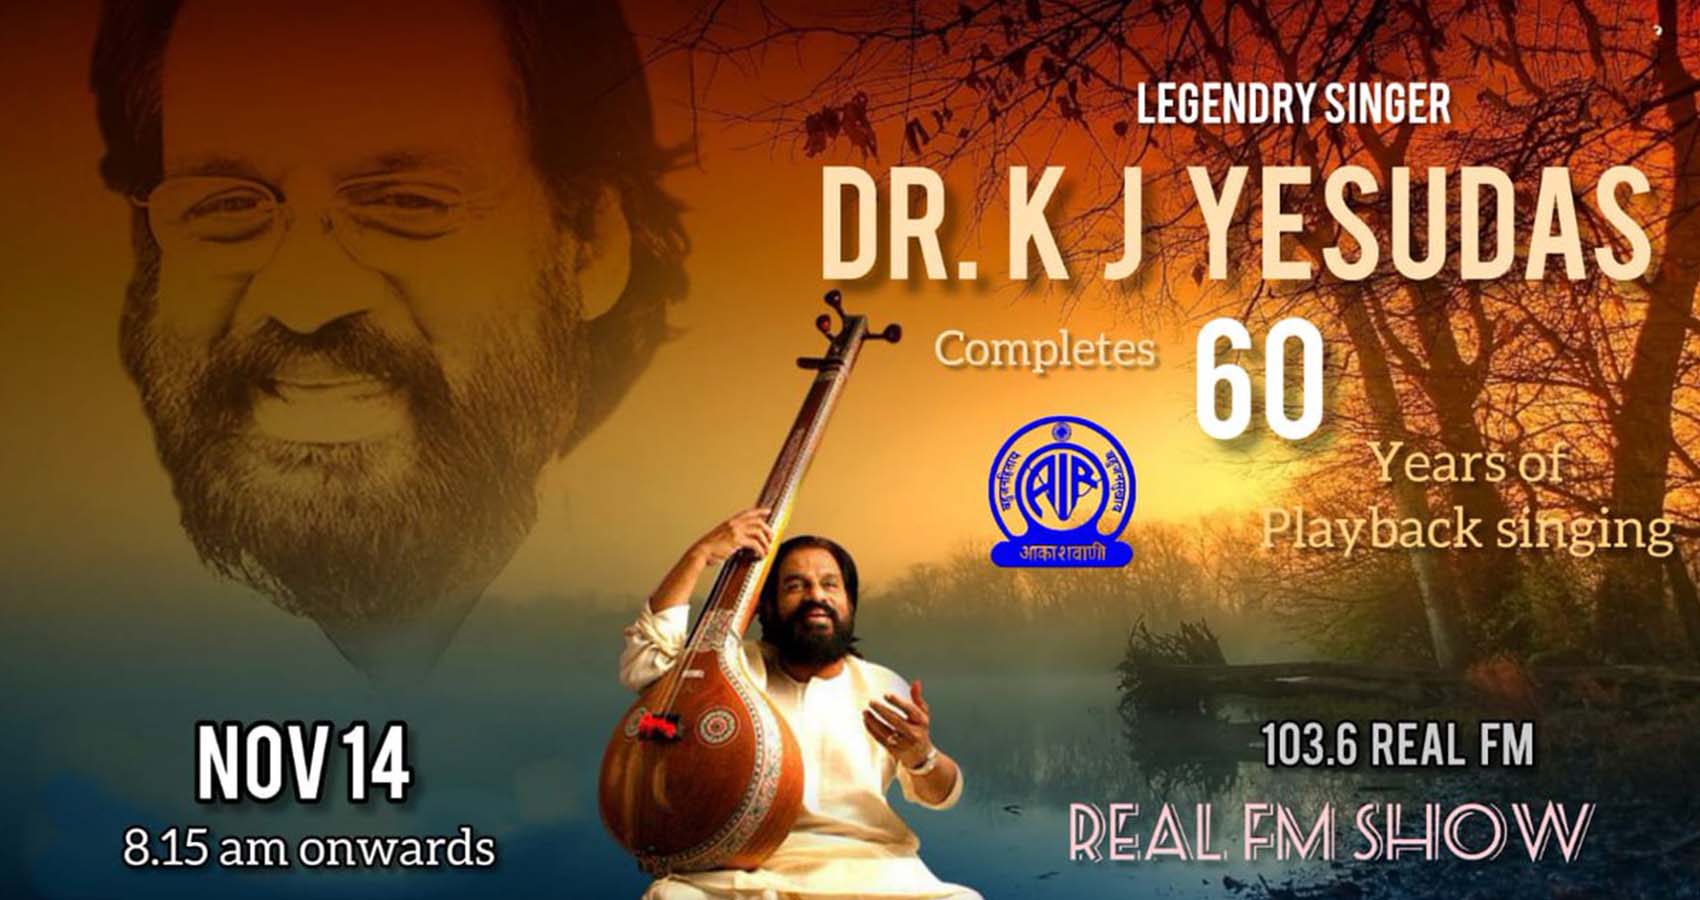 KJ Yesudas, With “Divine Voice” Marks For 60 Years As Playback Singer